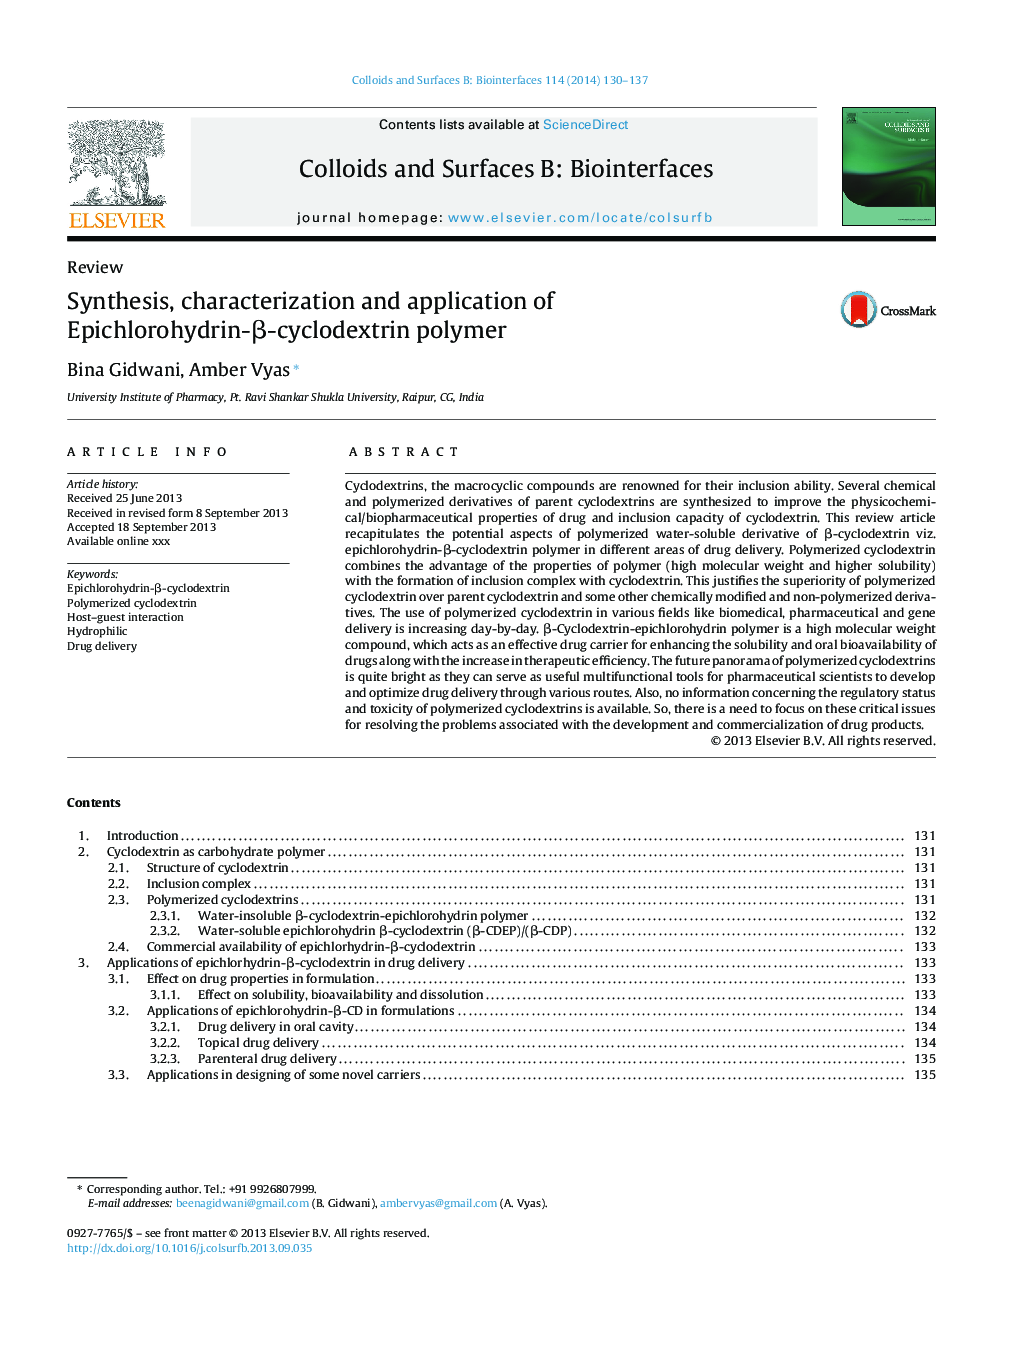 Synthesis, characterization and application of Epichlorohydrin-Î²-cyclodextrin polymer